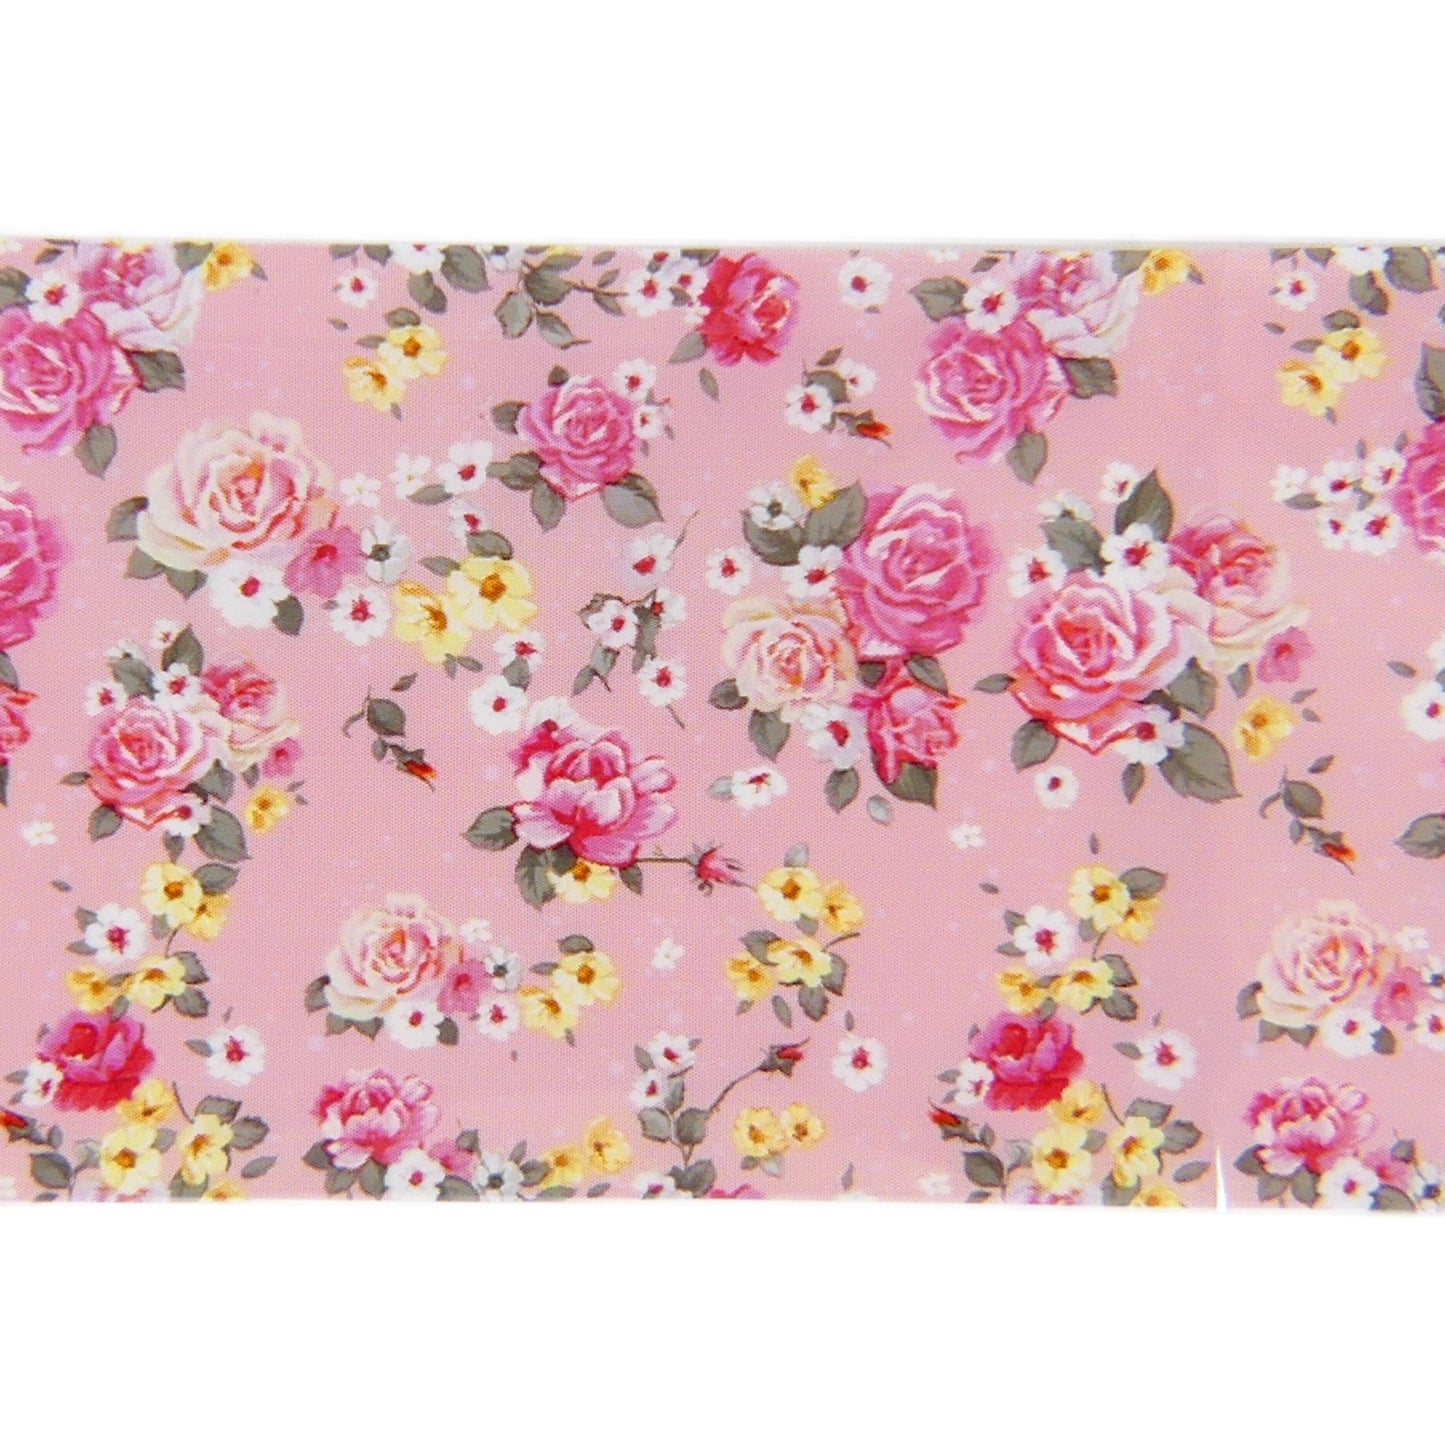 Load image into Gallery viewer, Transfer Foil Flowers #8 (38”) - My Little Nail Art Shop
